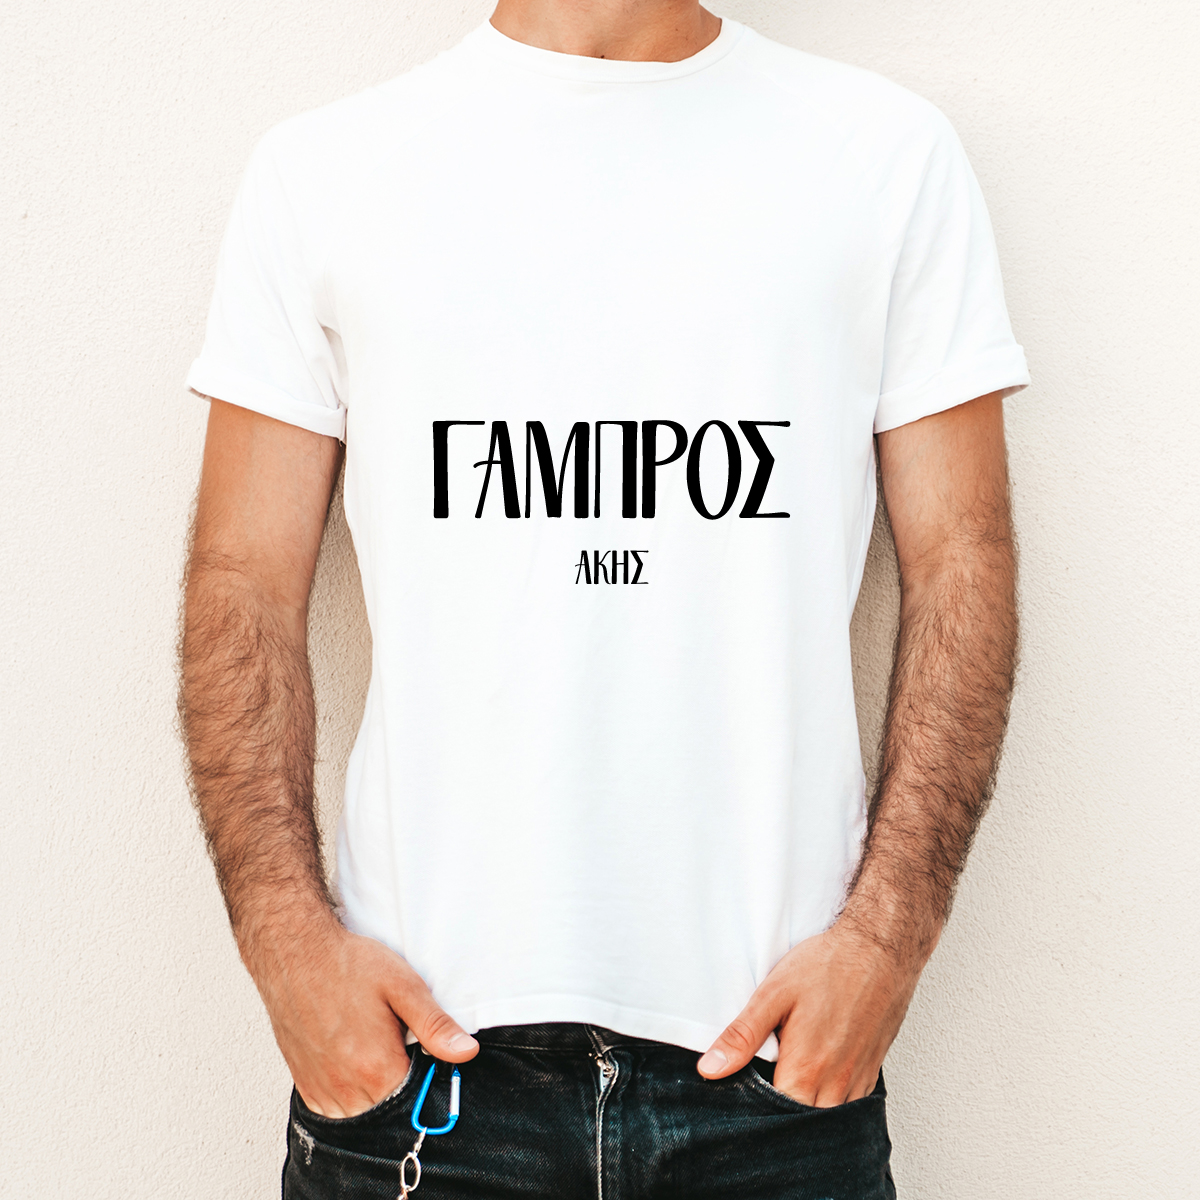 BD T-shirt Γαμπρός with name